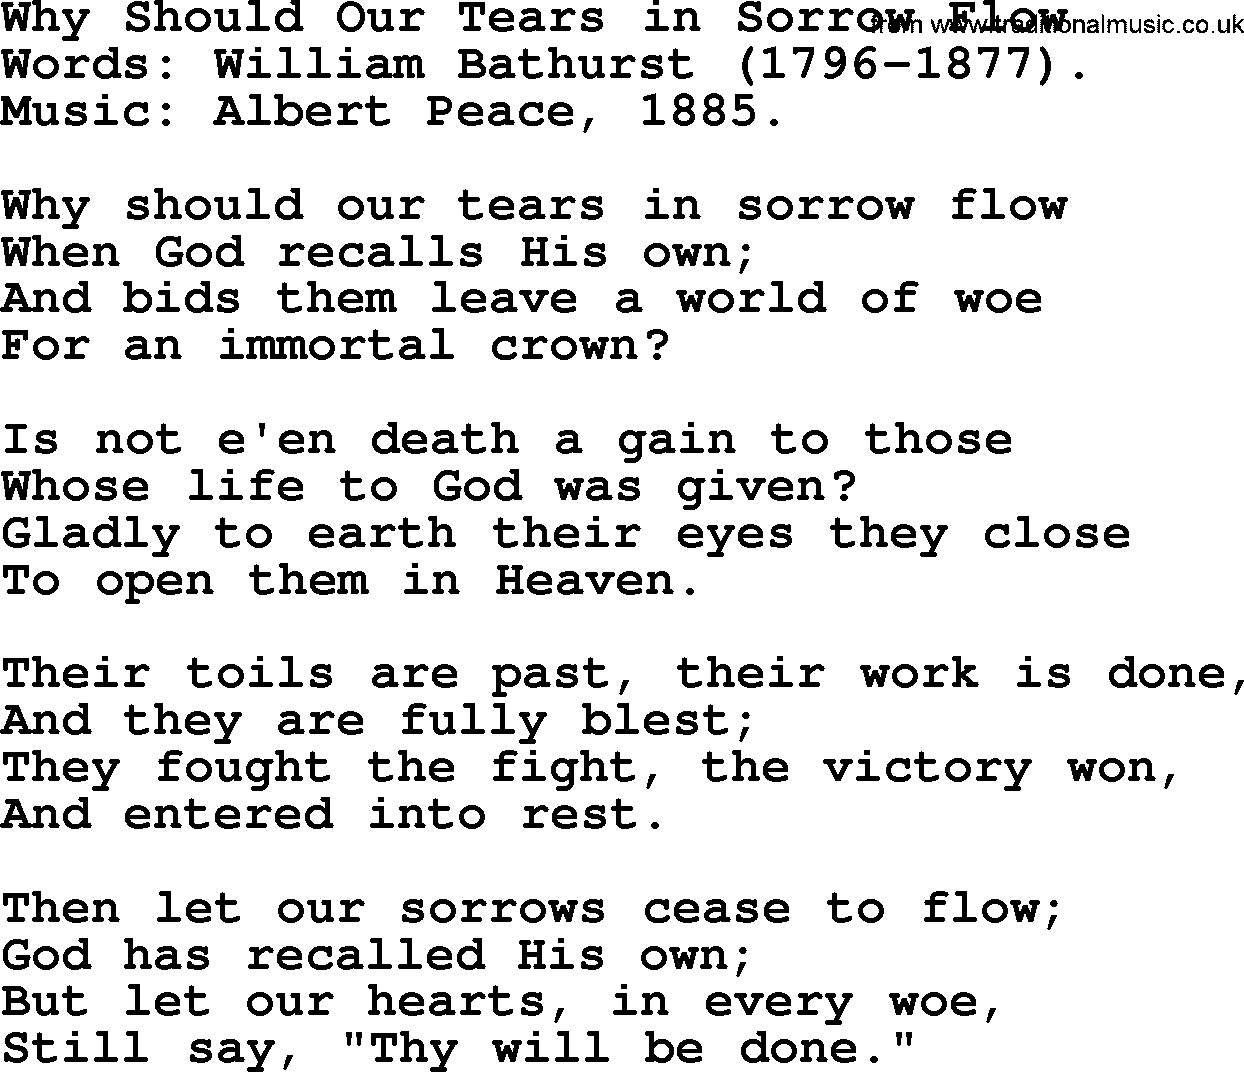 100+ Christian Funeral Hymns collection, Hymn: Why Should Our Tears in Sorrow Flow, lyrics and PDF